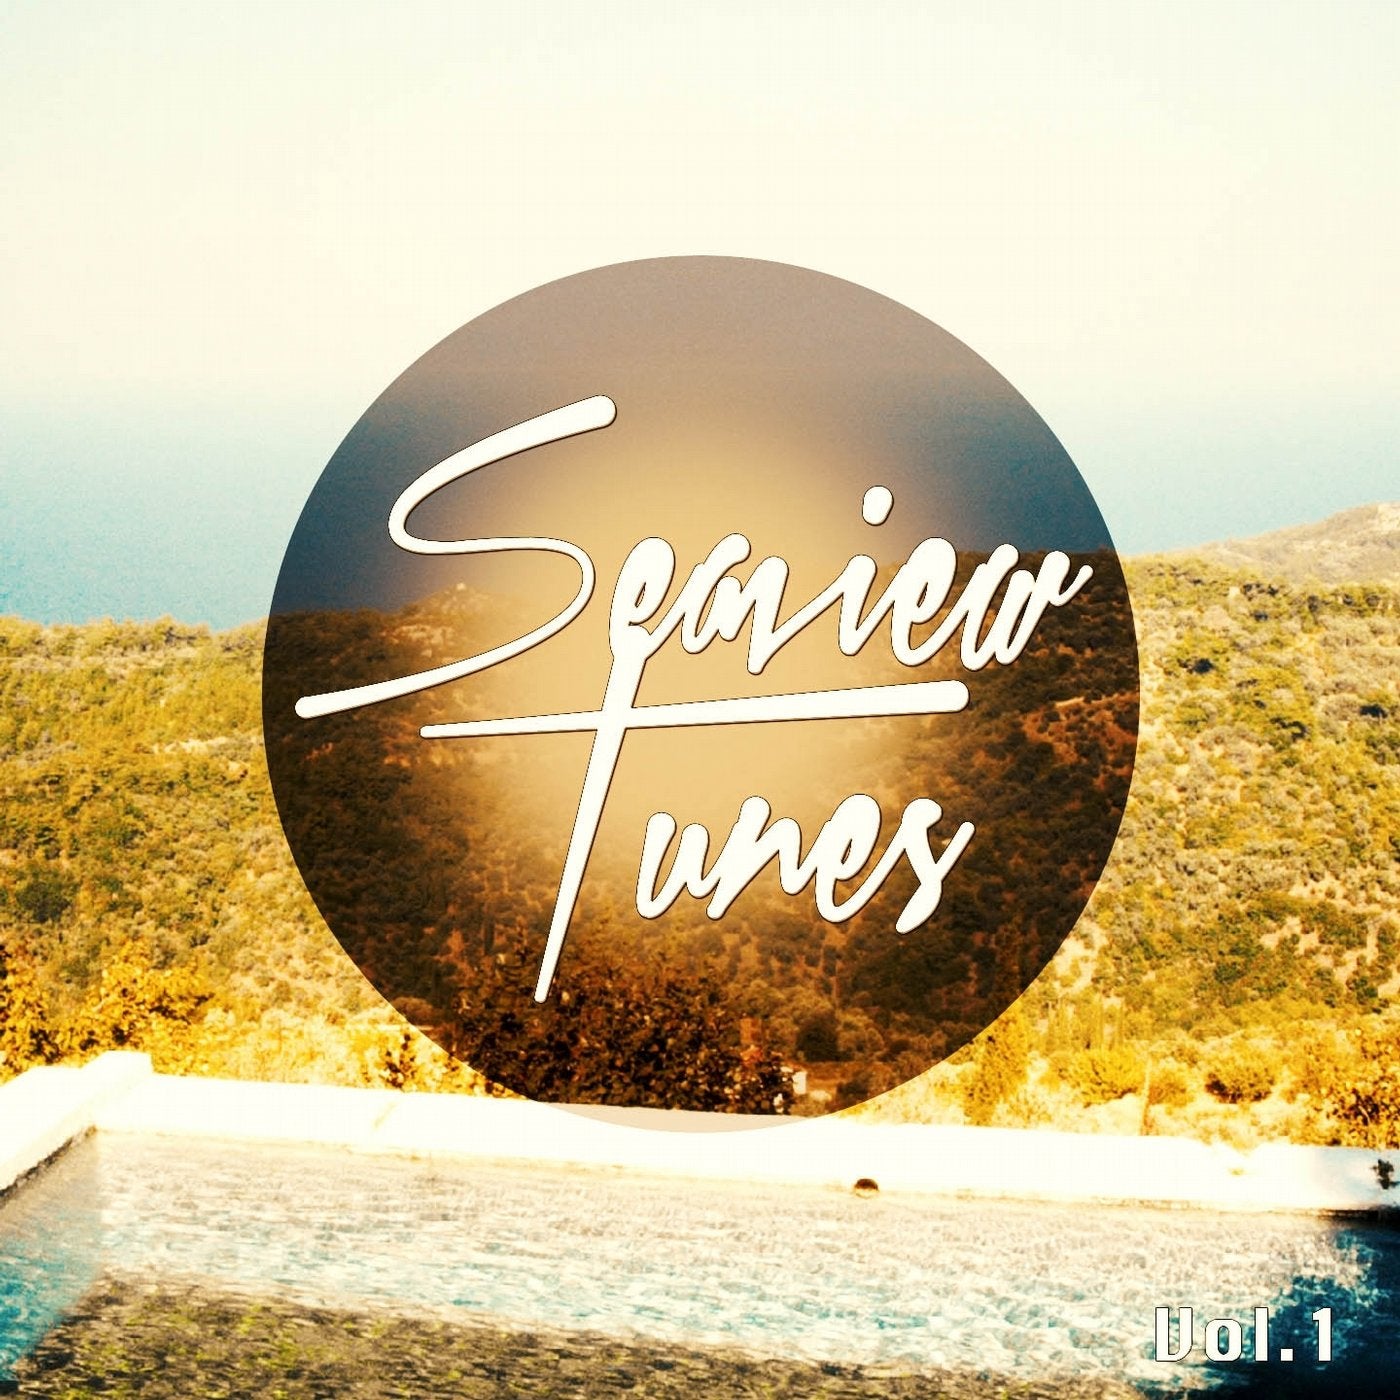 Seaview Tunes, Vol. 1 (Sun Floating Beats with View to the Sea)